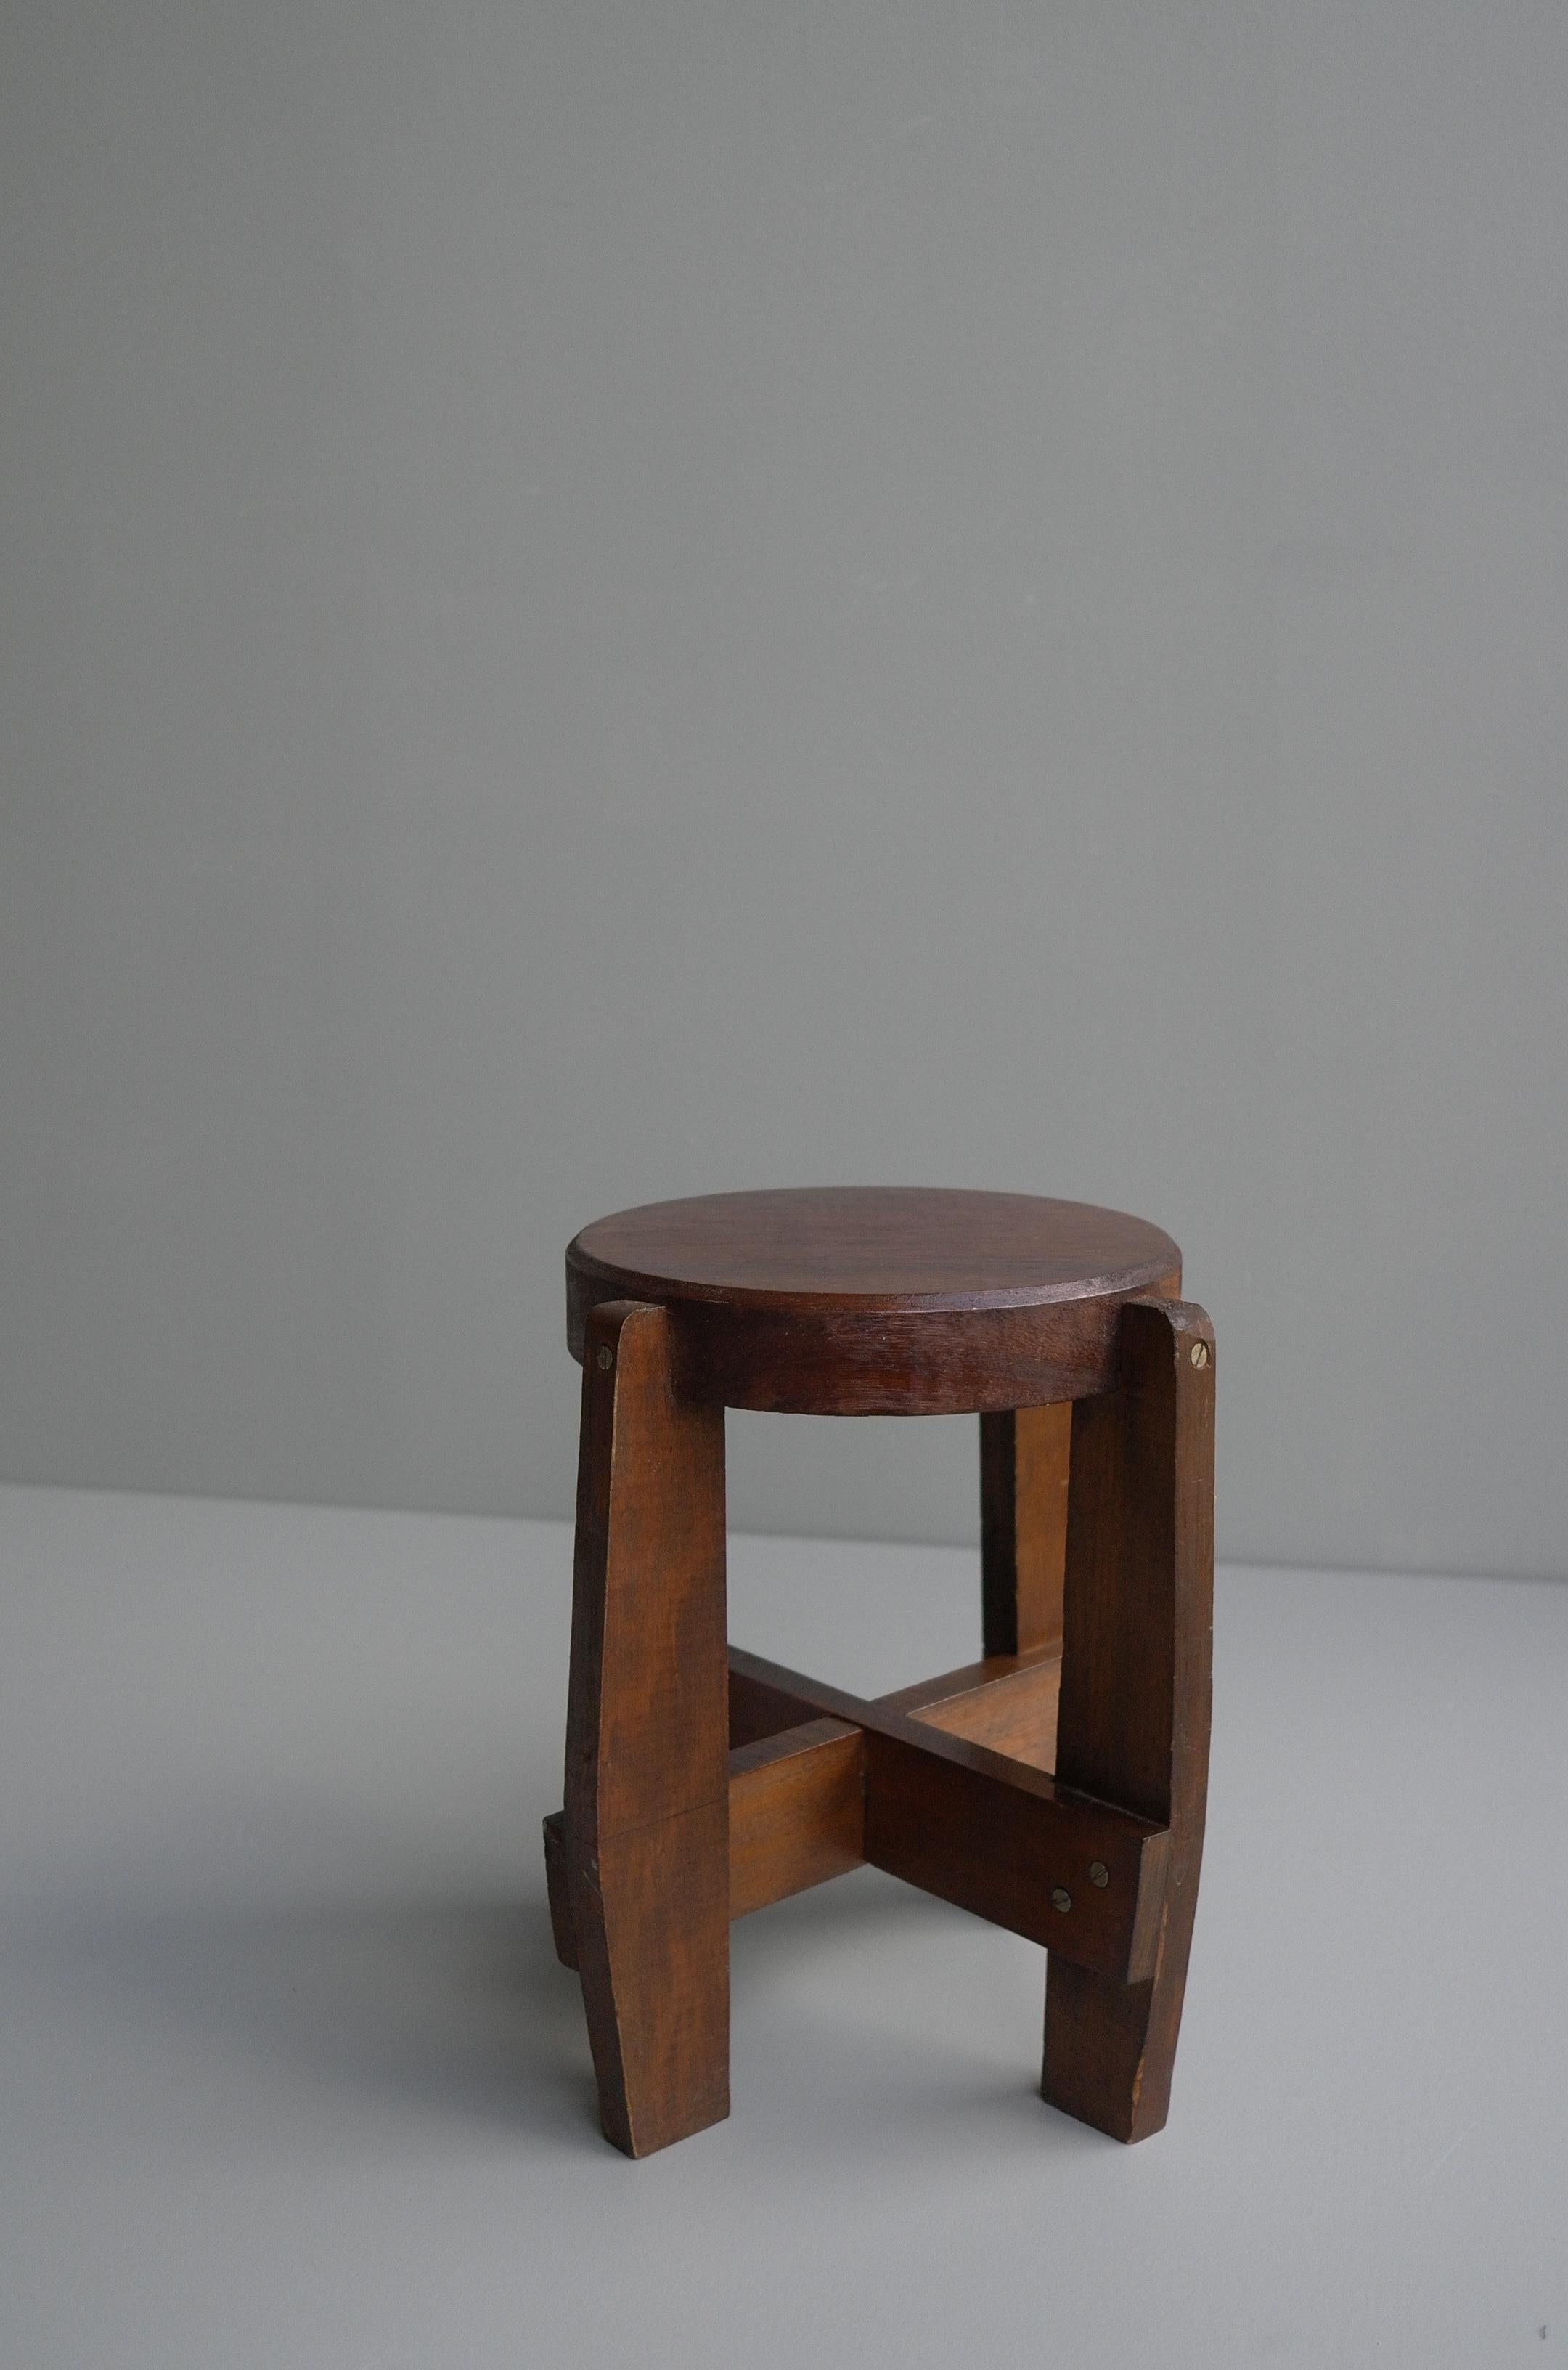 Dutch Decorative Wooden Art Deco Stool or Small Side Table, Cubism, 1930's